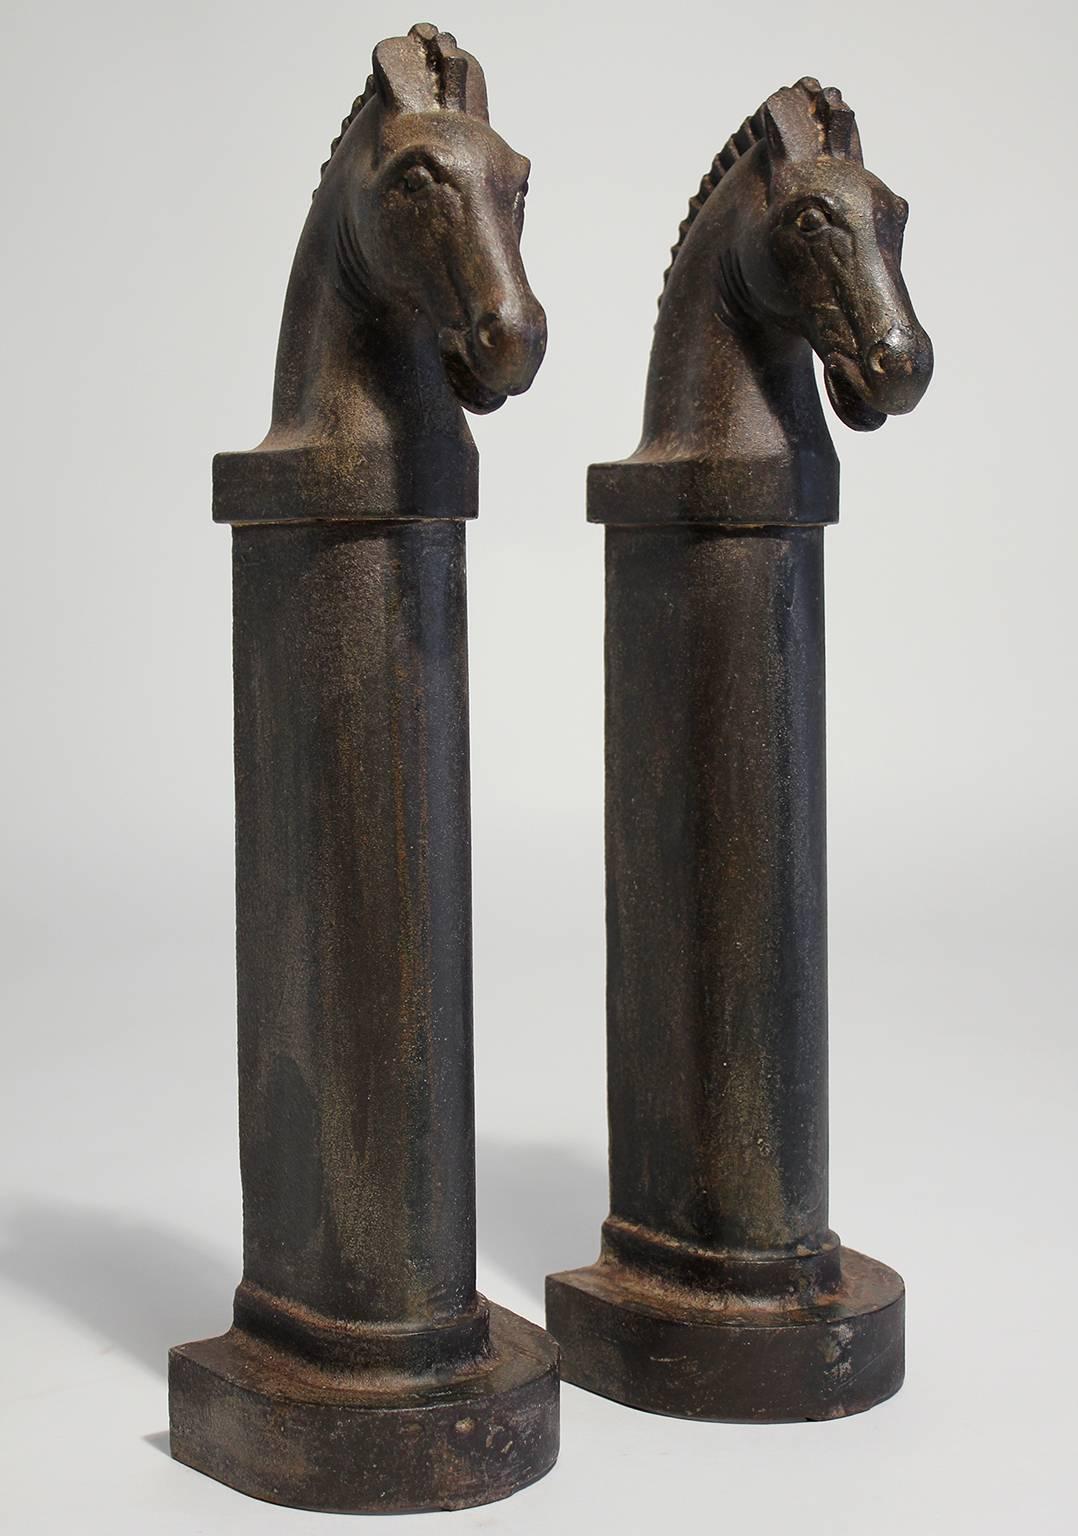 Fantastic pair of antique Art Deco cast iron decorative and sculptural horse head andirons with nice aged natural patina.